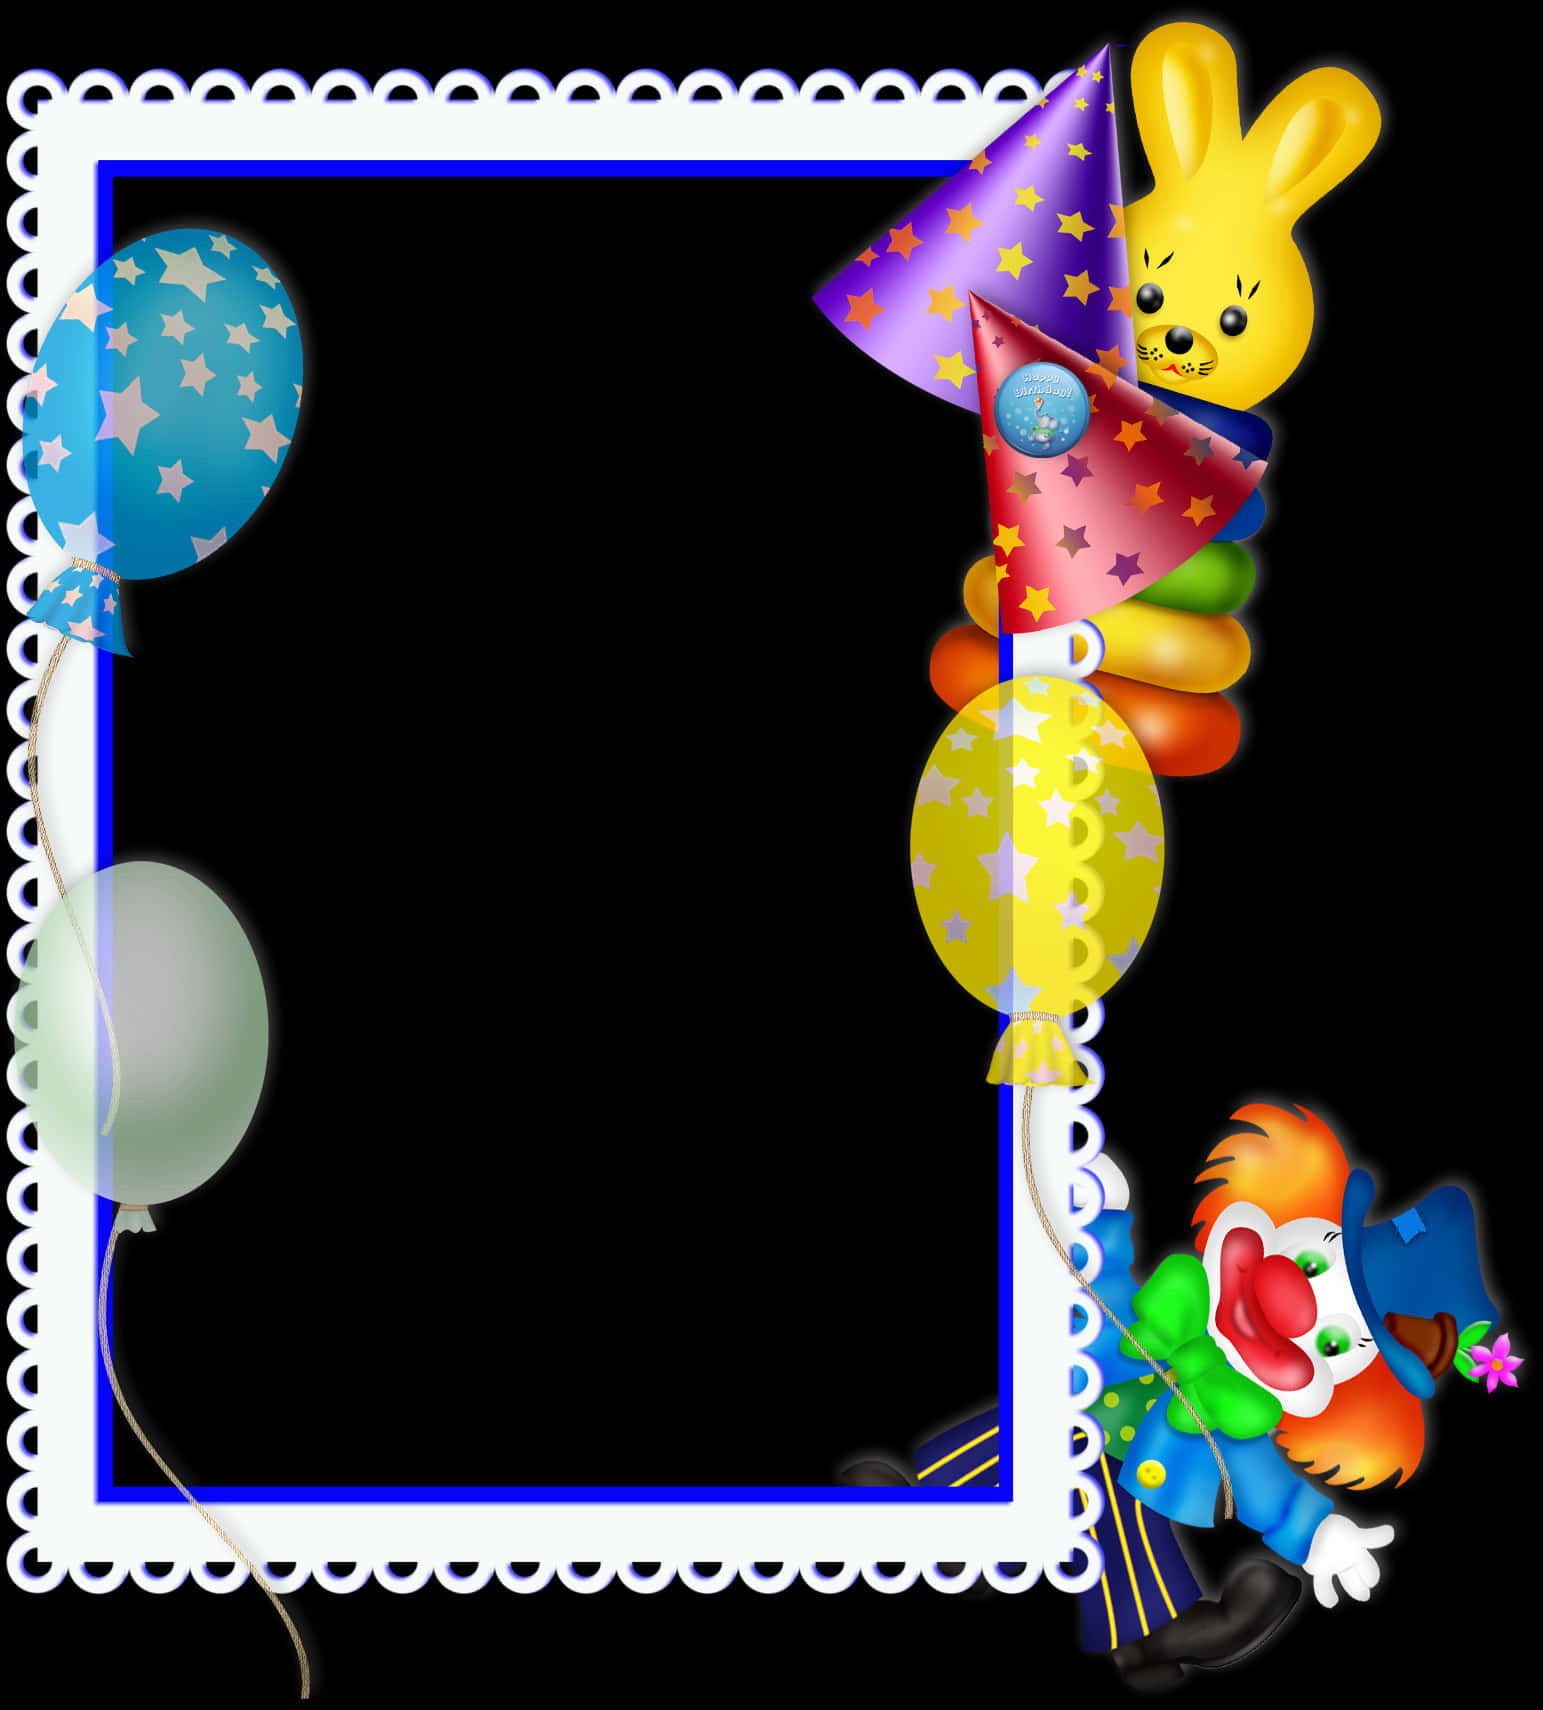 A Frame With Balloons And A Rabbit